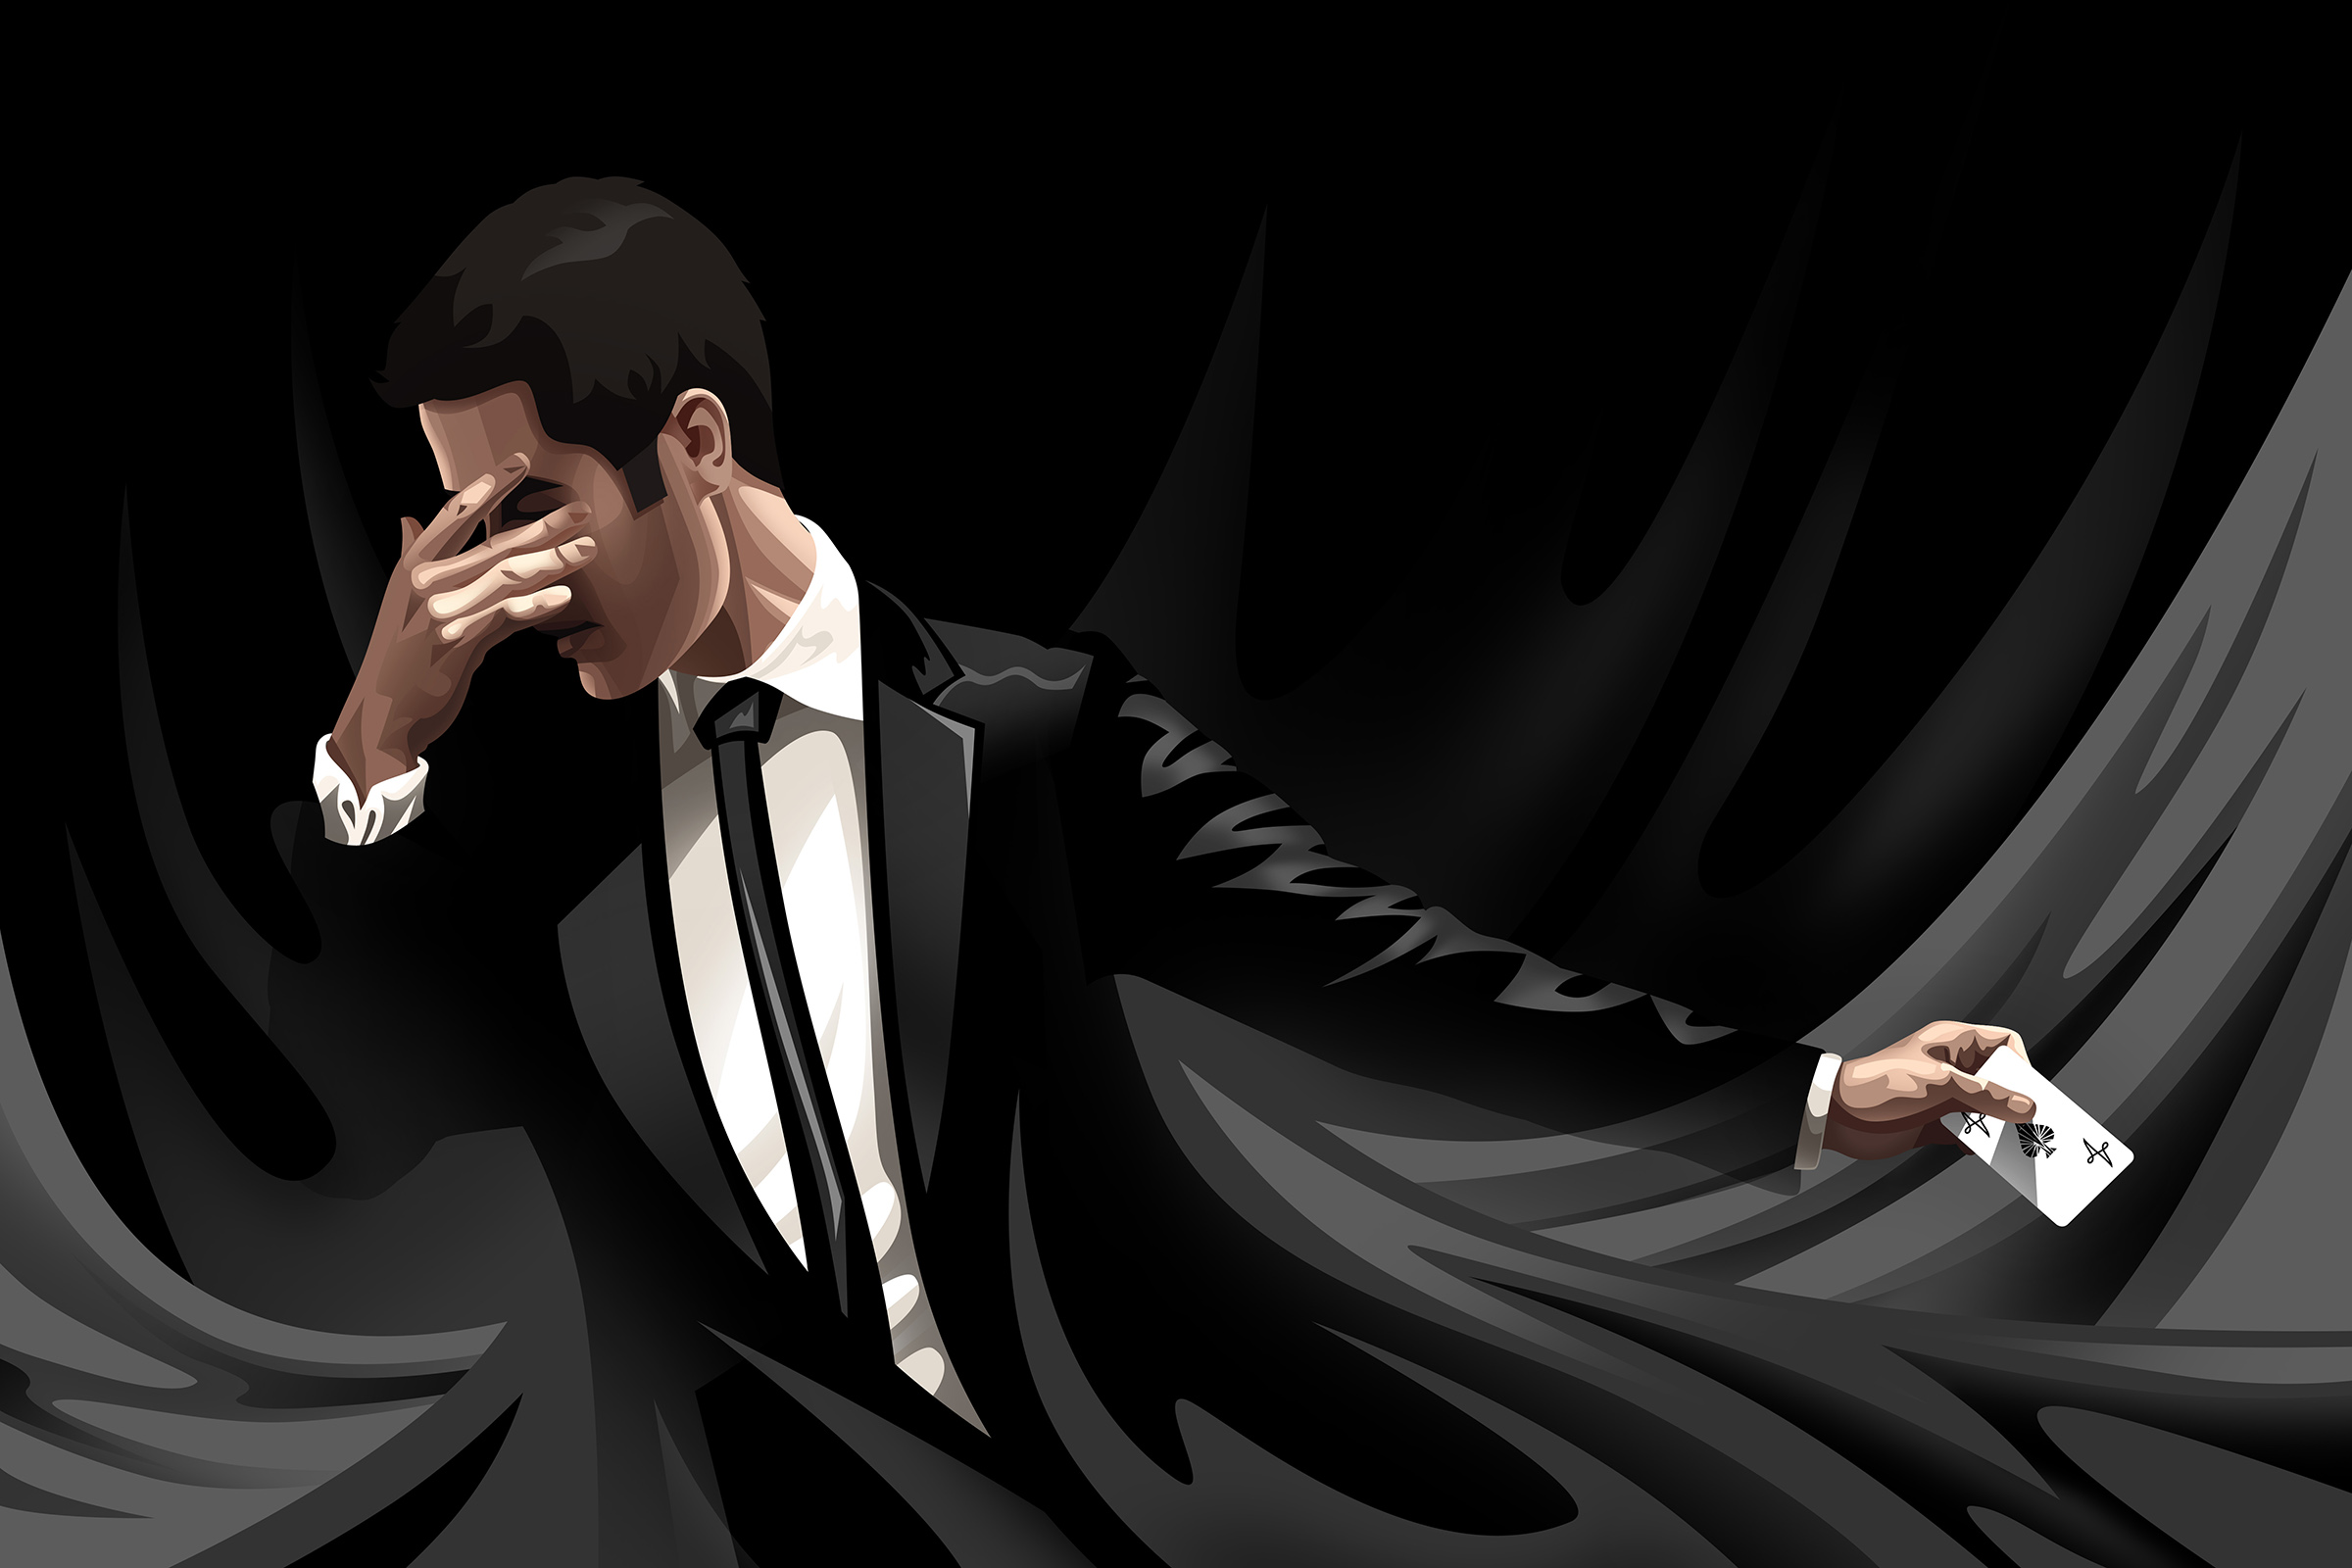 A vectored portrait of the magician David Kwong. He holds his hand over his eyes as he summons a playing card.